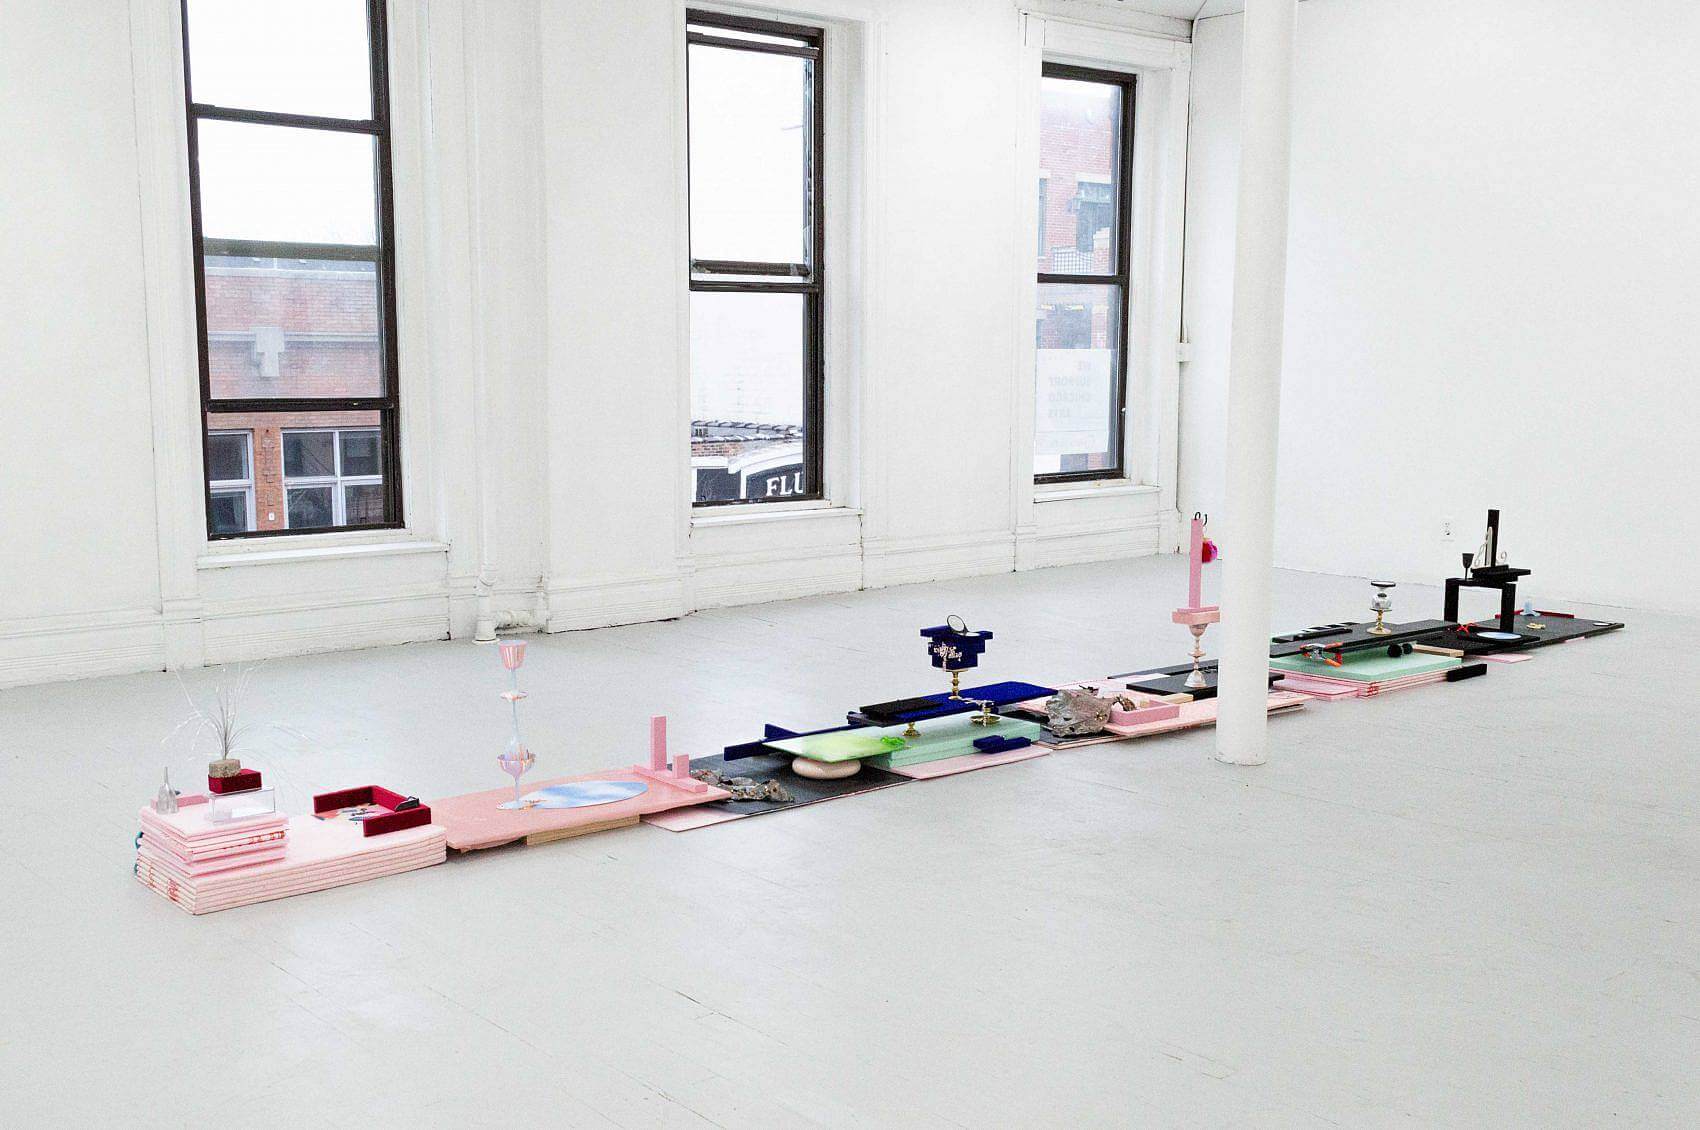 There is a long, low, and narrow sculpture sitting on the floor. There are various stacks of of light pink, green, and black insulation foam topped with various small objects like tinsel, small blue towels, compact mirrors, rhinestones, or small makeup sponges. There are also many small velvet blocks in blue and red.